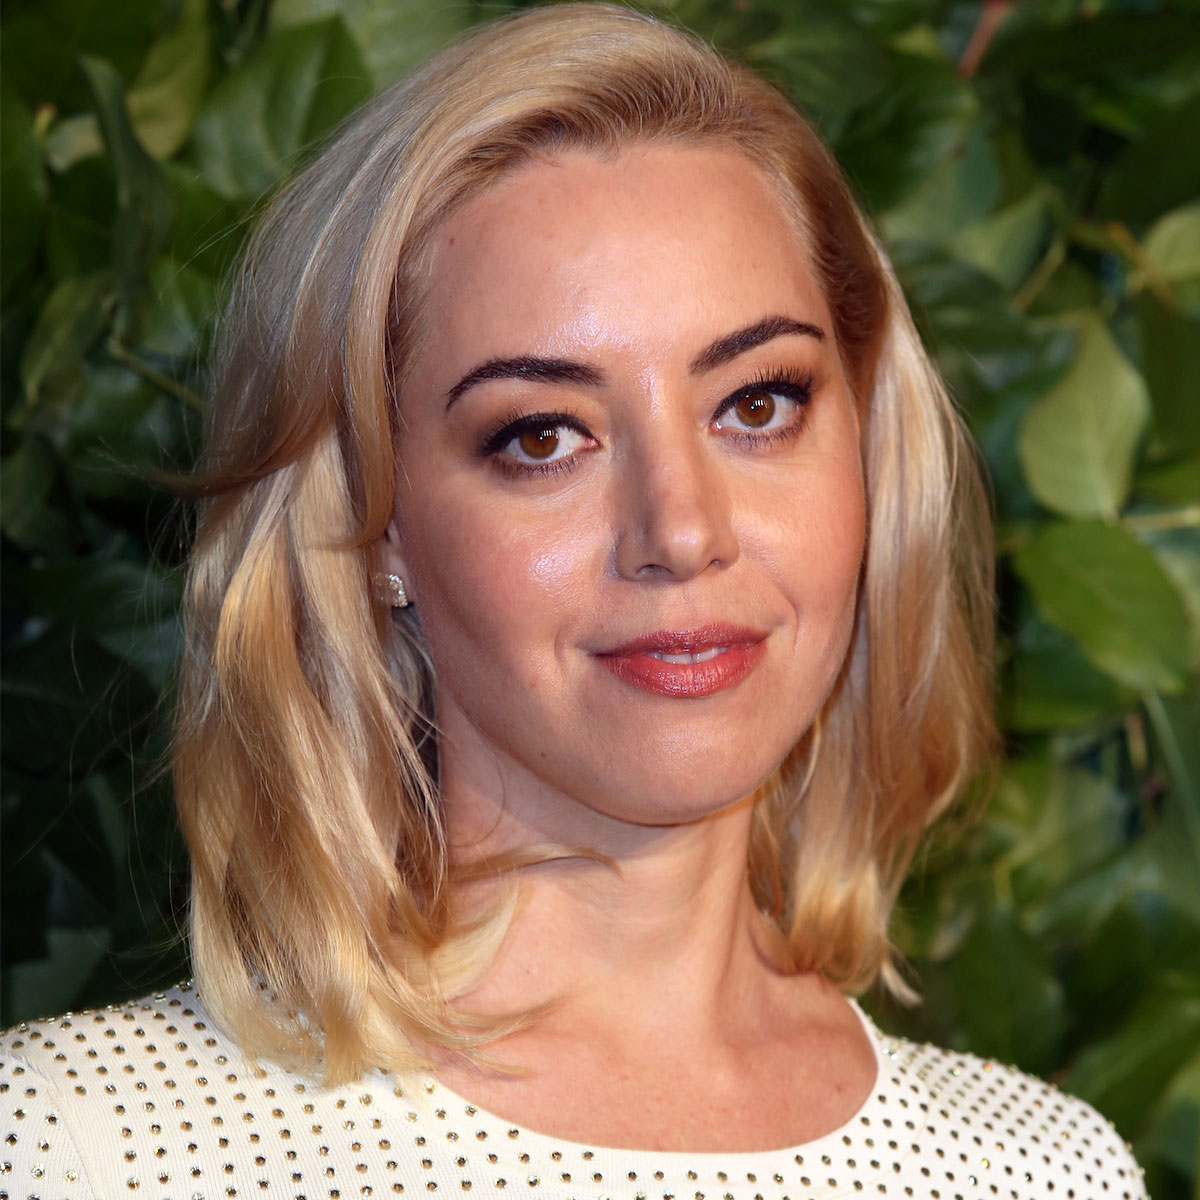 Aubrey Plaza Shows Off Her New Blonde Hair (And Her Abs) In A Crop Top And  High-Slit Skirt At The Gotham Awards - SHEfinds